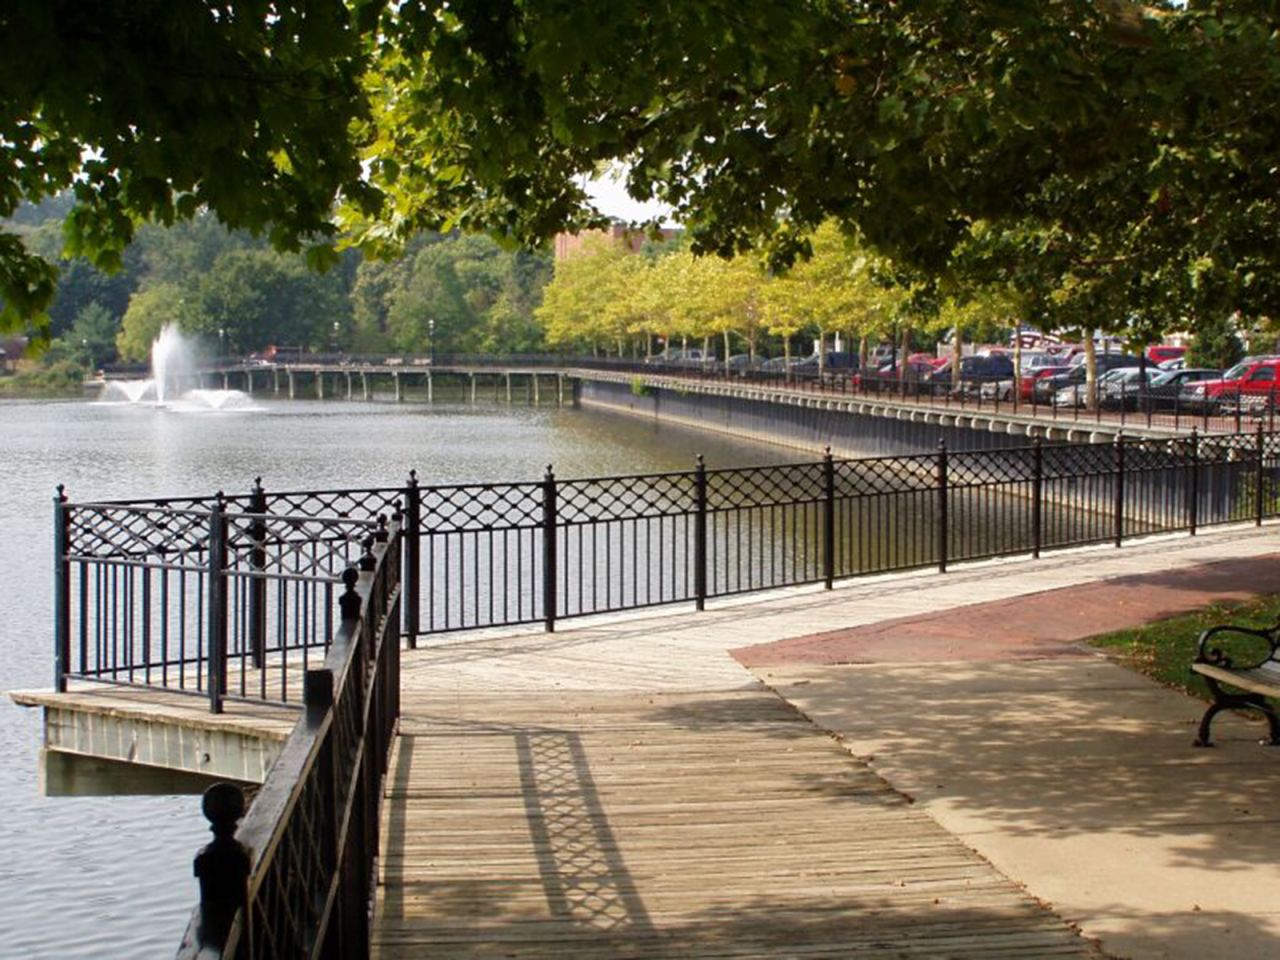 Allegan, Michigan, No. 4 on Budget Travel's list of small towns, boasts a tranquil boardwalk tracing the path of the Kalamazoo River.